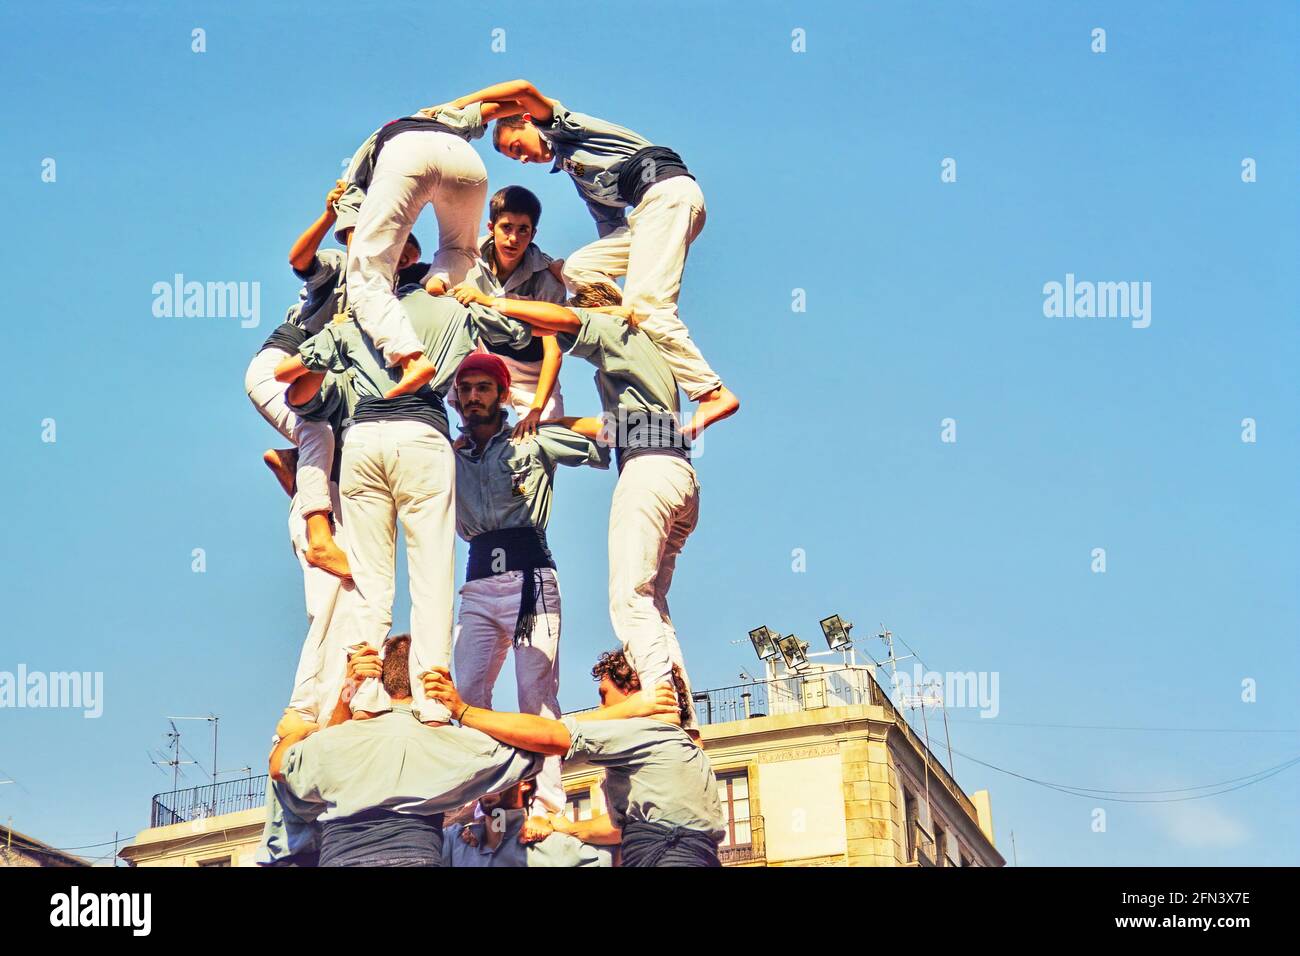 Barcelona, Spain - September 23, 1999: Local people building human towers (Castellers), part of the traditional La Merce Festival, in Barcelona, Spain Stock Photo